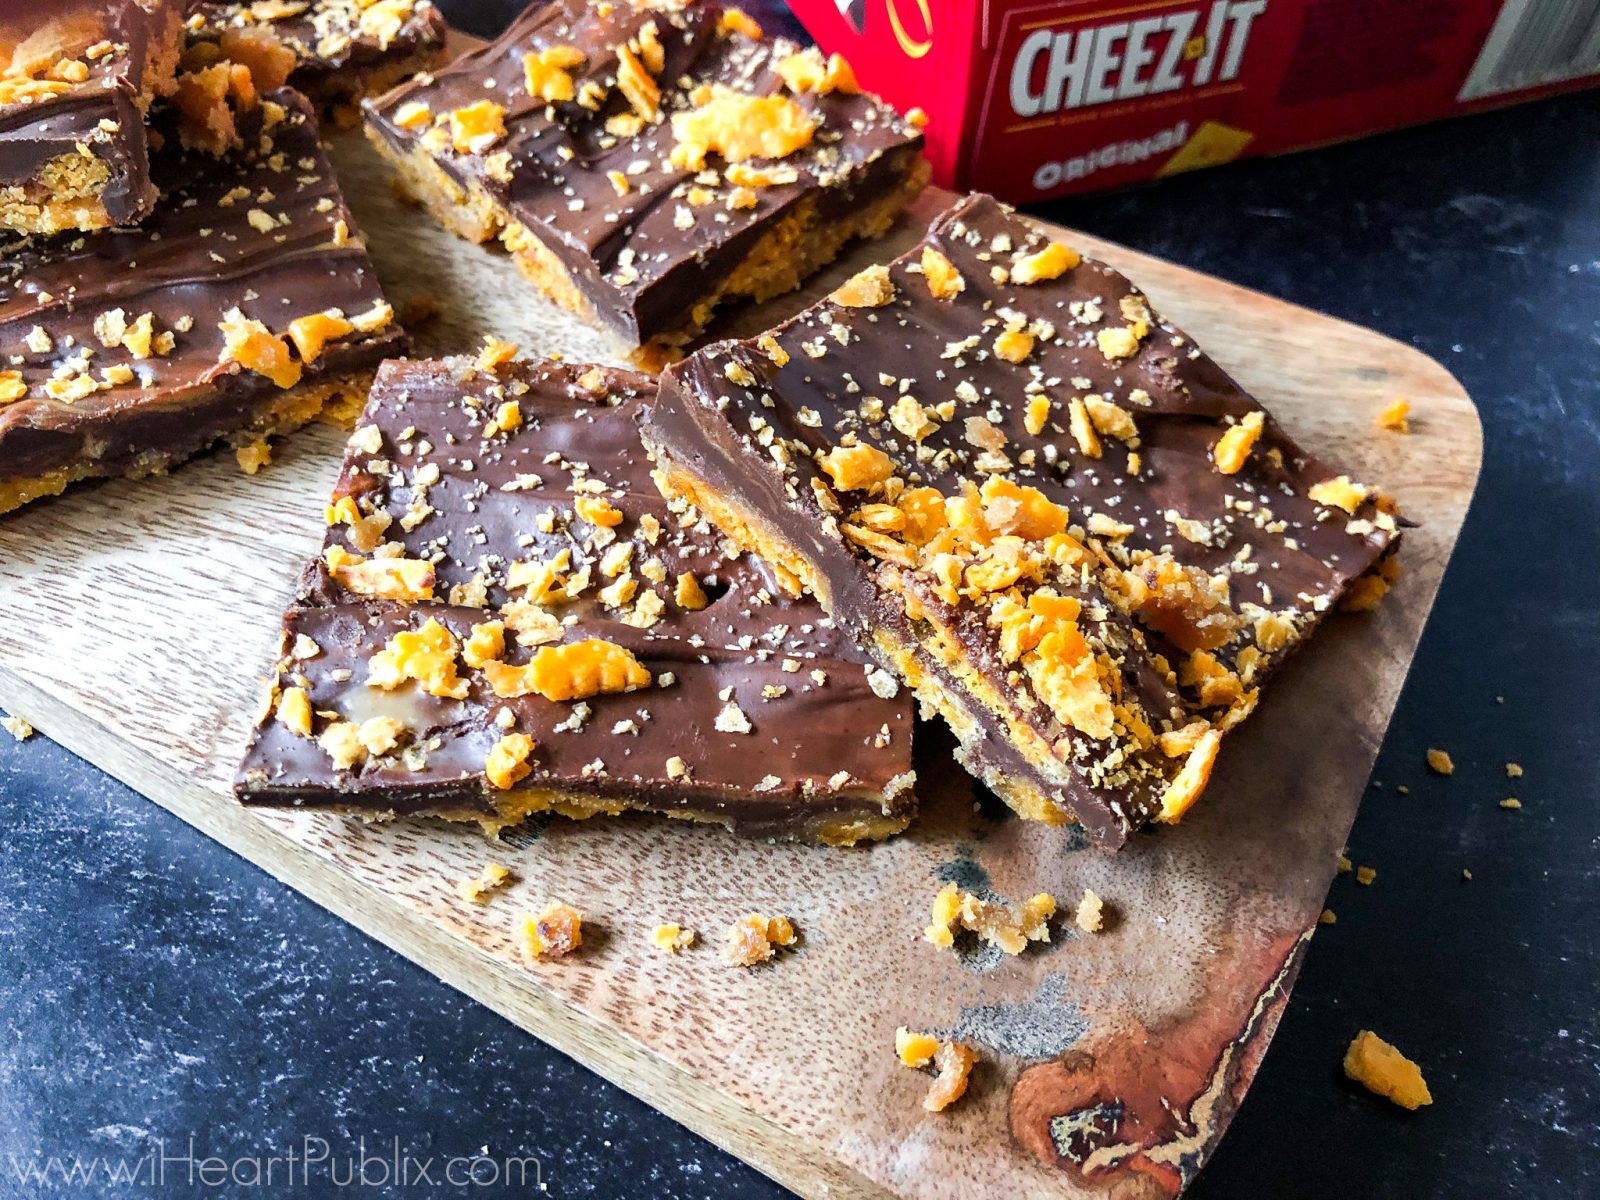 Cheez-It Peanut Butter Toffee Squares